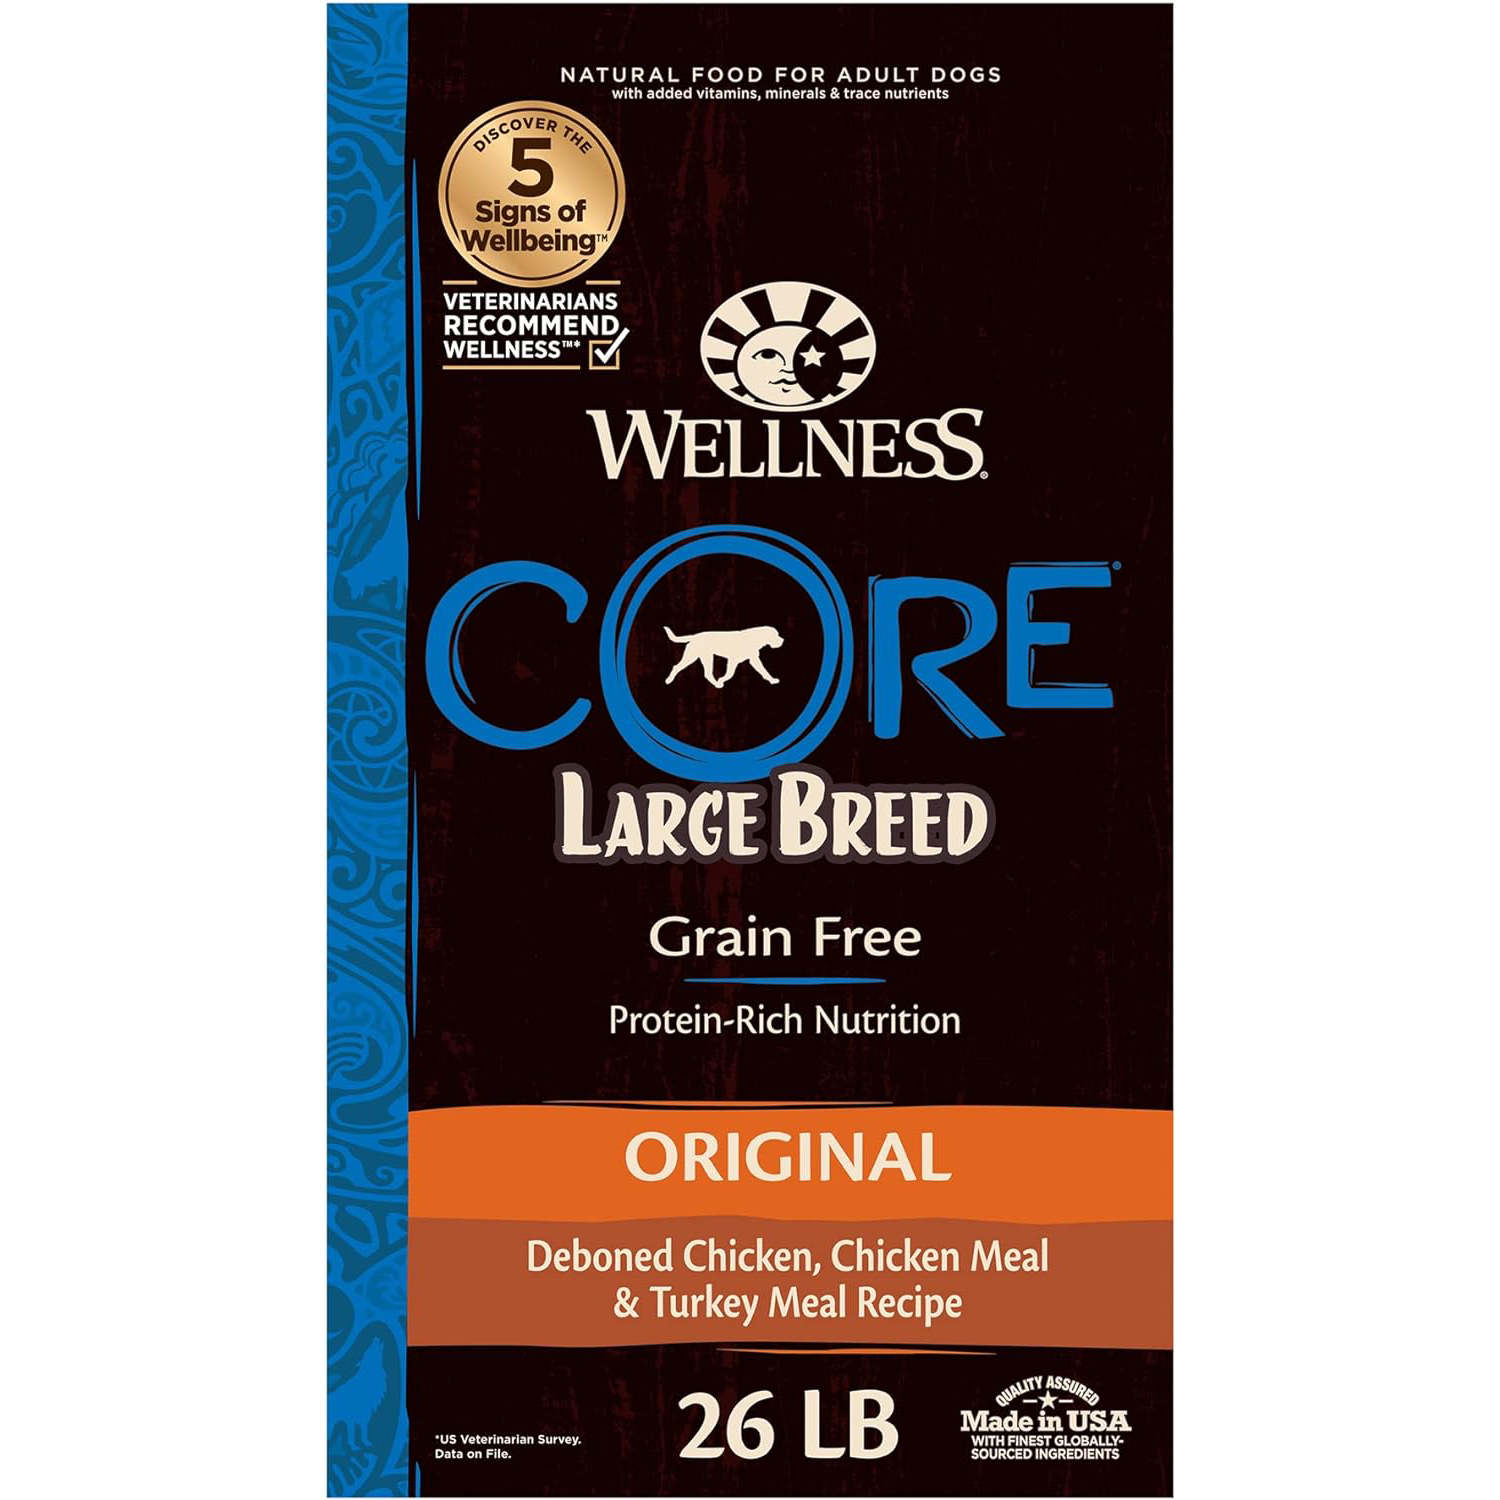 New Project Wellness Natural Pet Food CORE Grain-Free High-Protein Large Breed Adult Dry Dog Food 